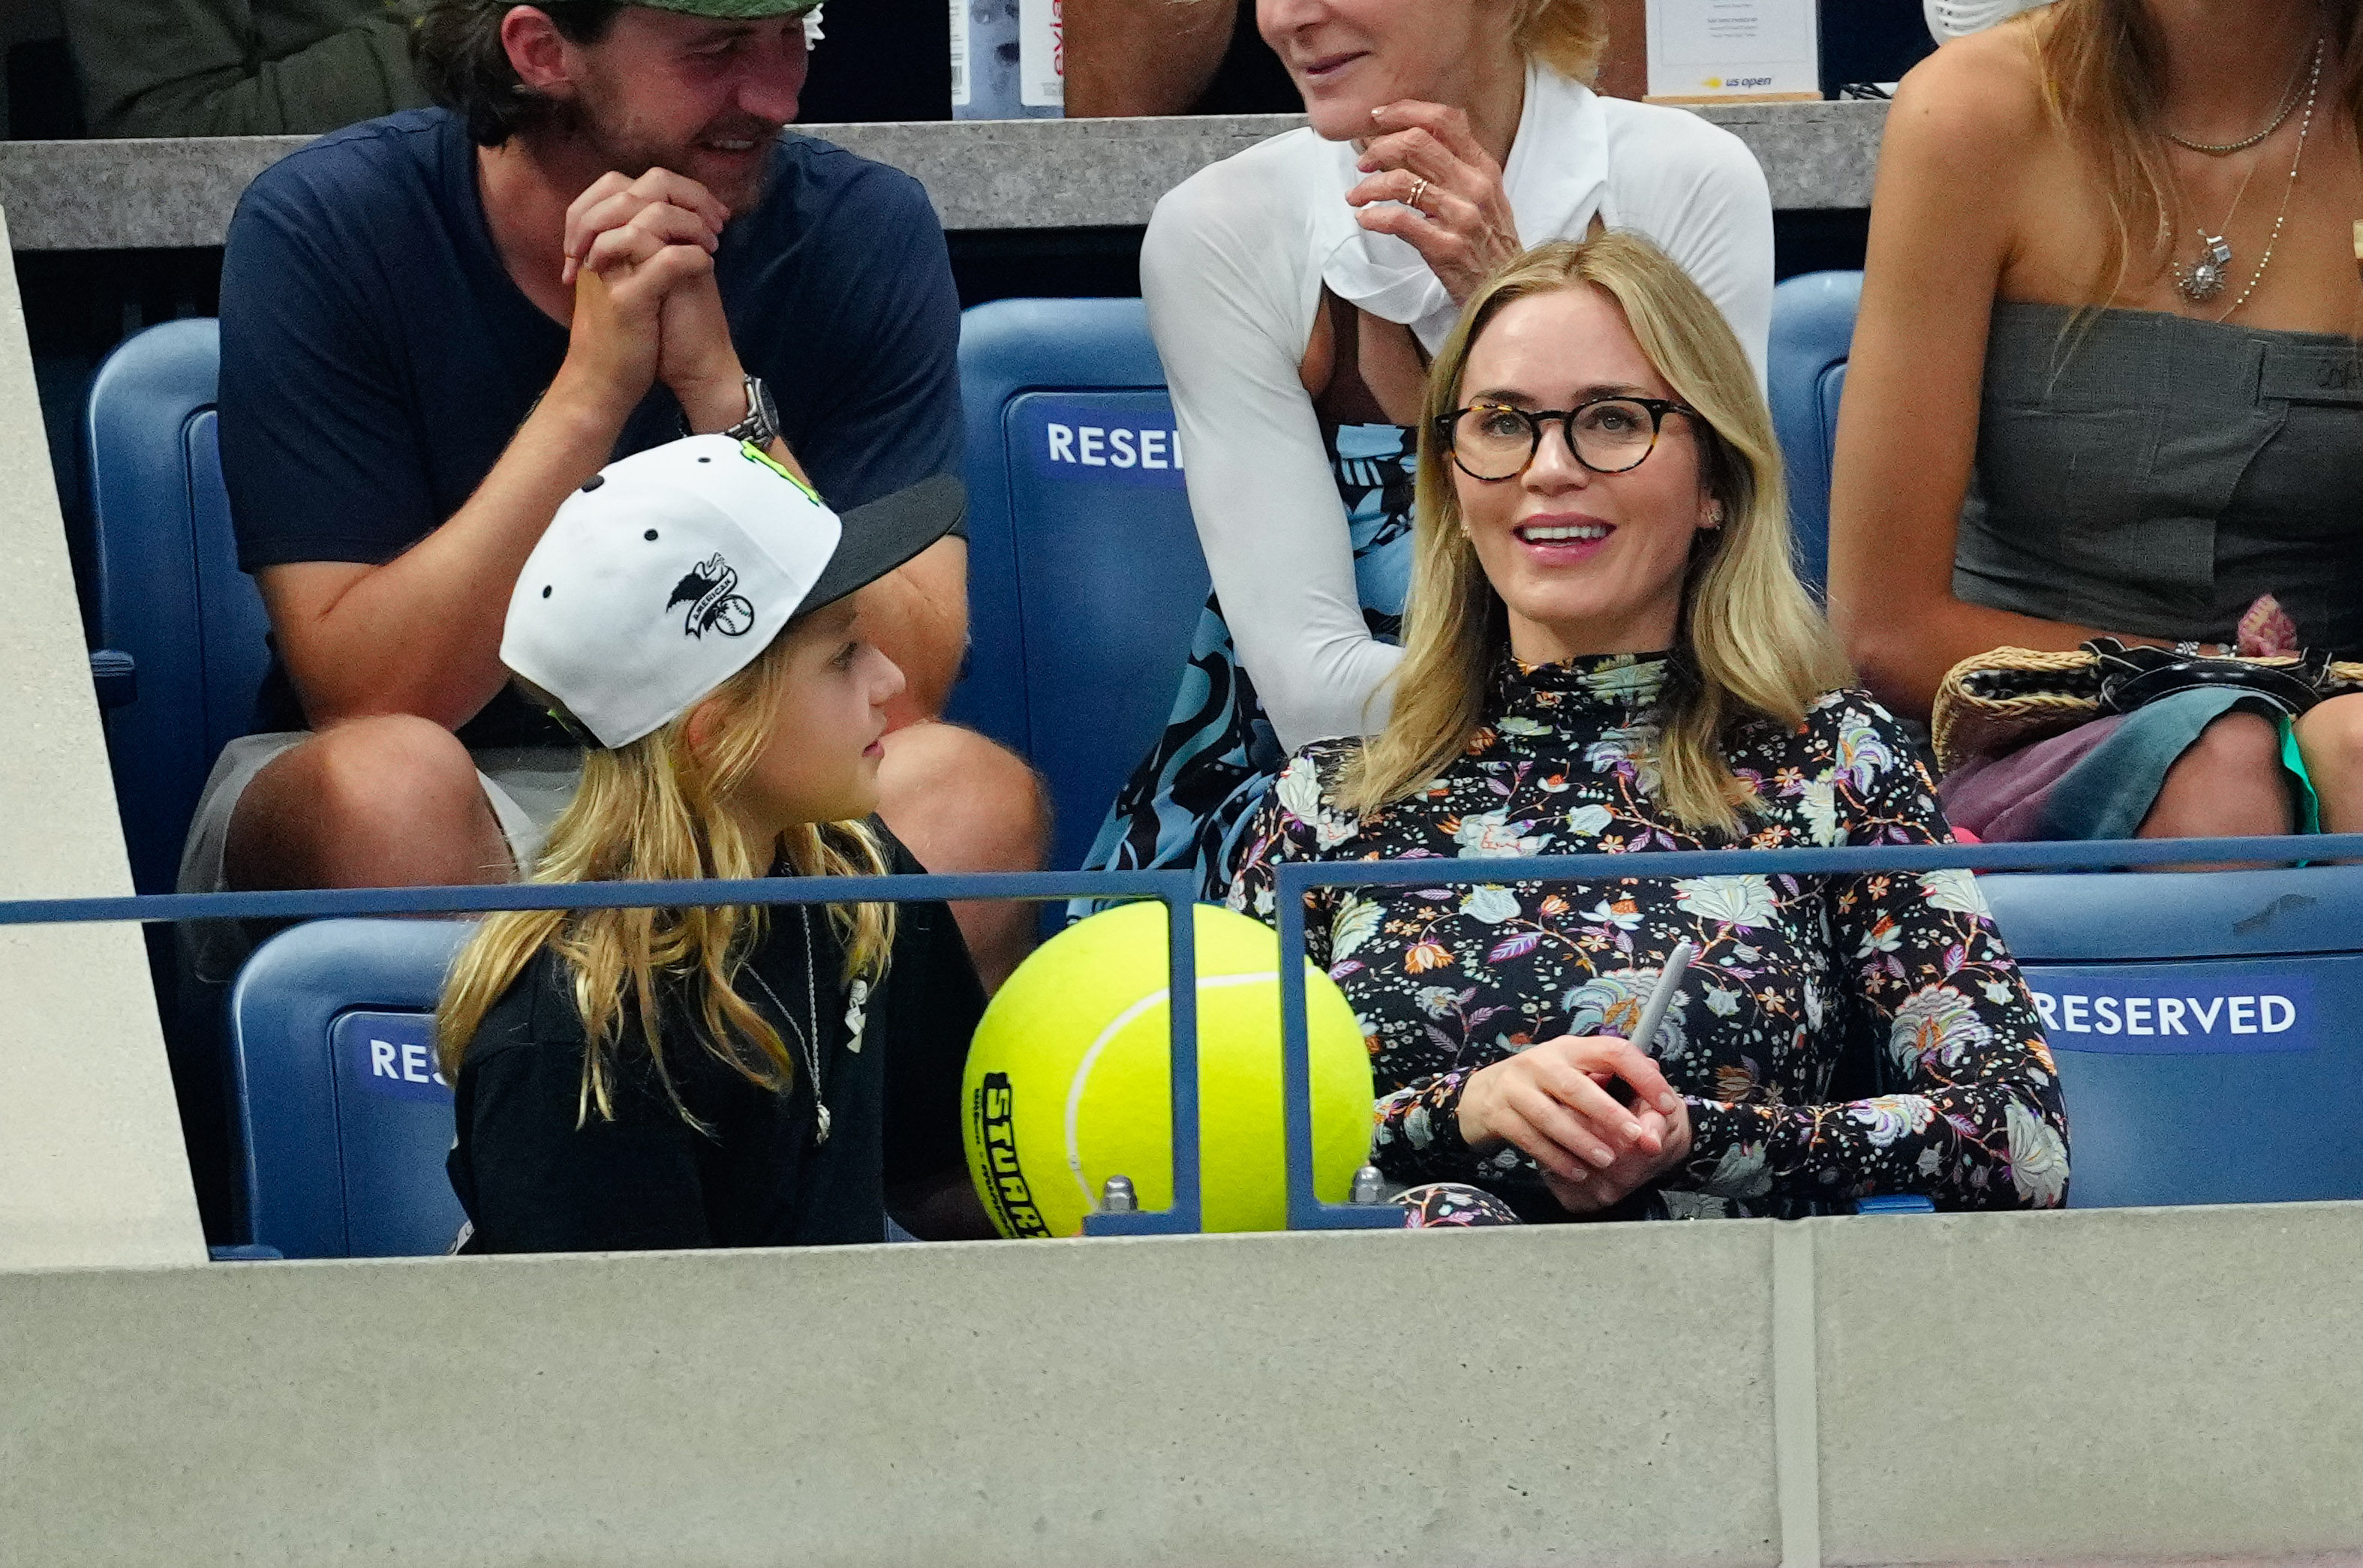 Hazel Krasinski and Emily Blunt at the 2023 US Open Tennis Championships in New York City | Source: Getty Images